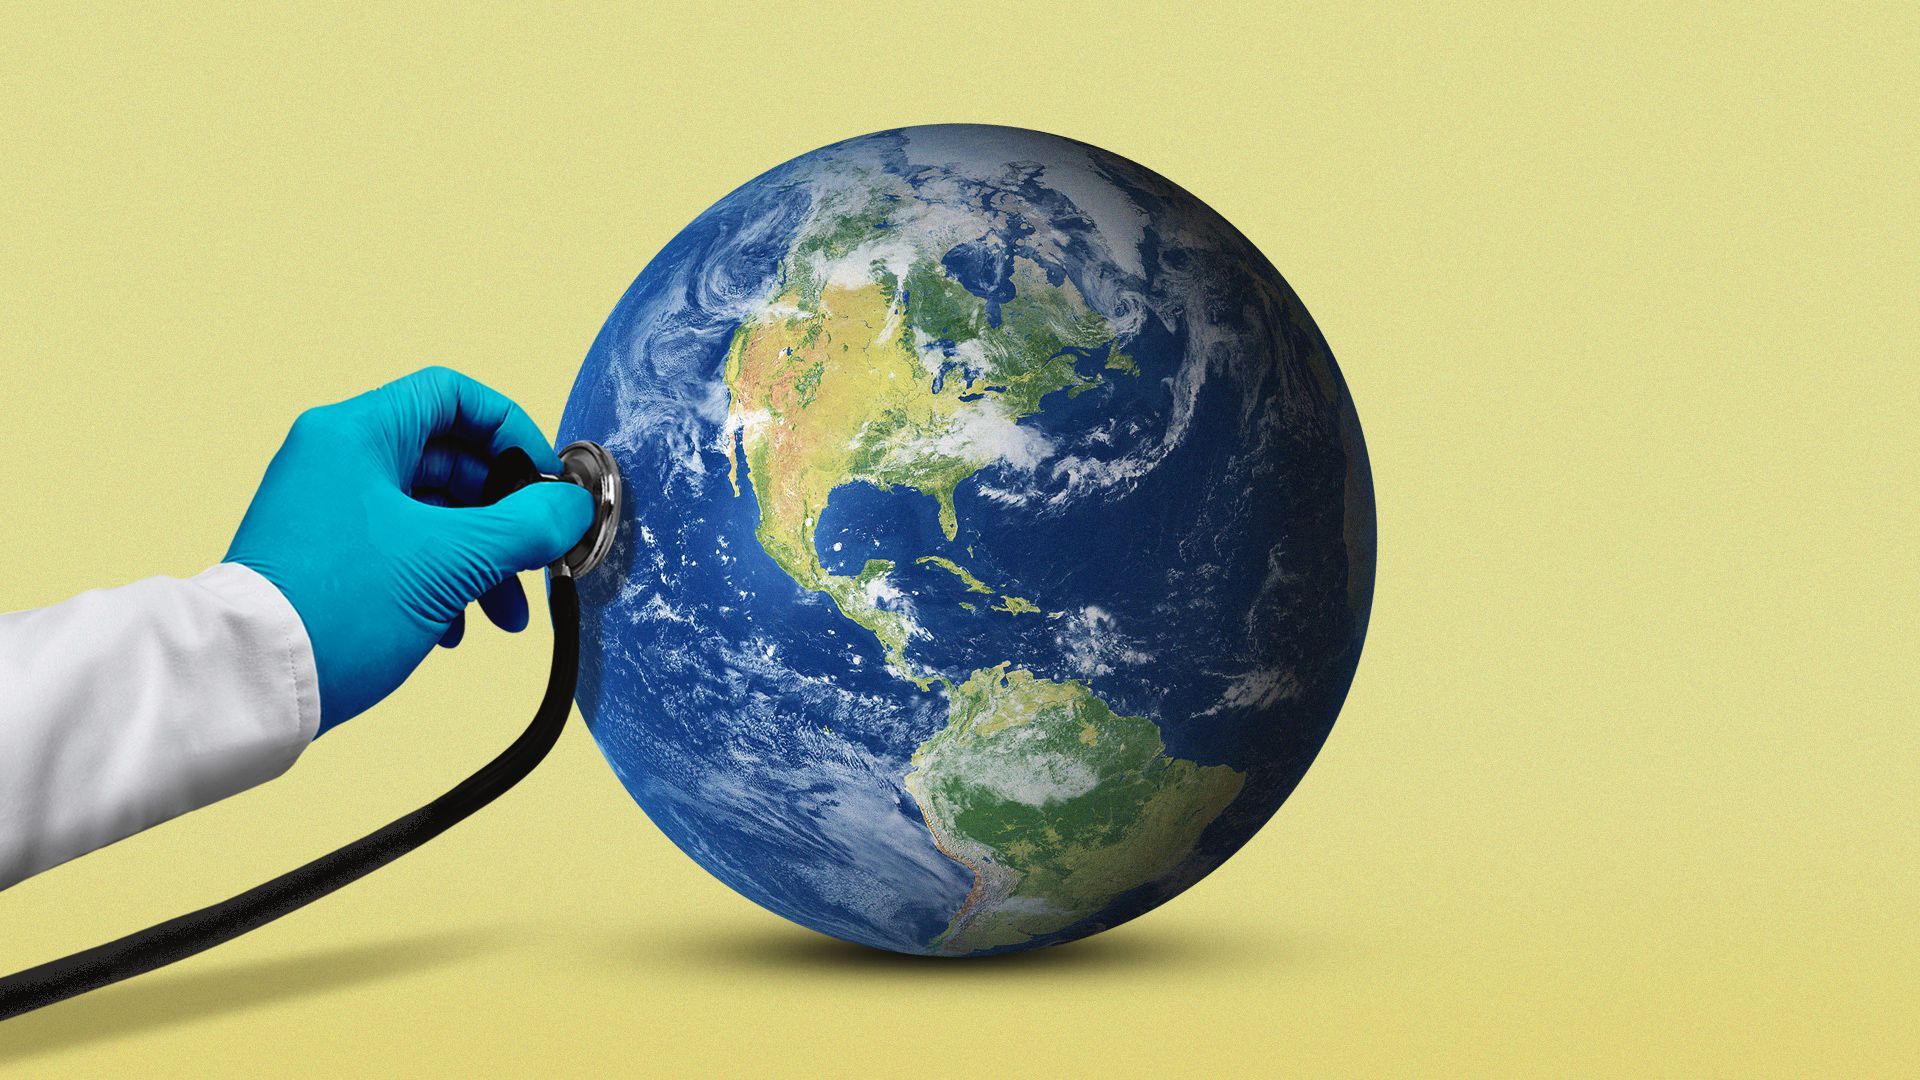 Illustration of a gloved hand holding a stethoscope up to planet earth.